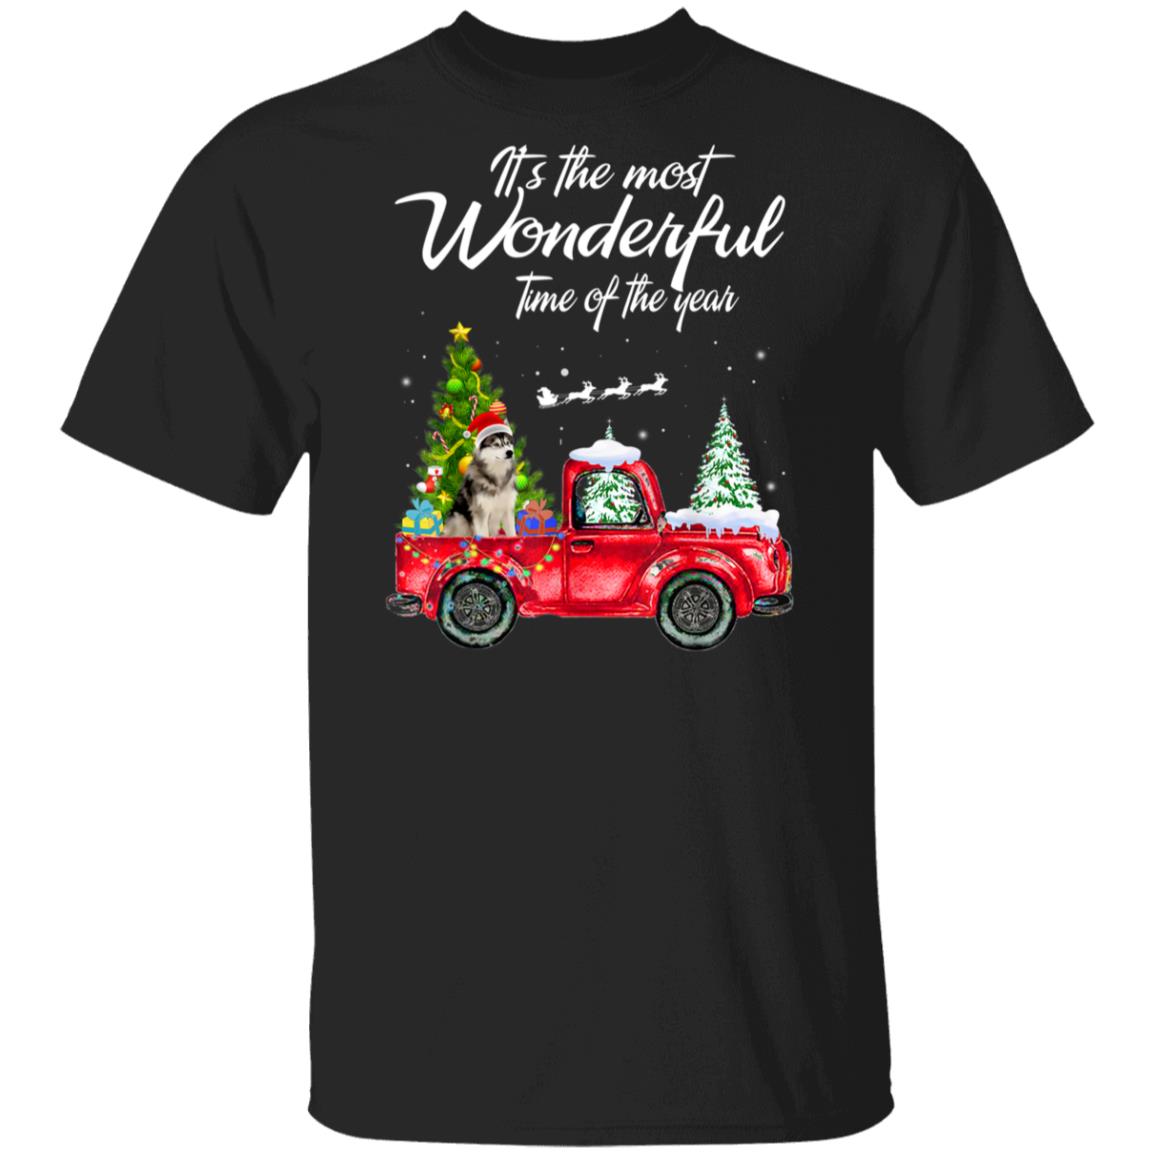 It’s The Most Wonderful Time Of The Year With Truck Husky Christmas Gift Shirt